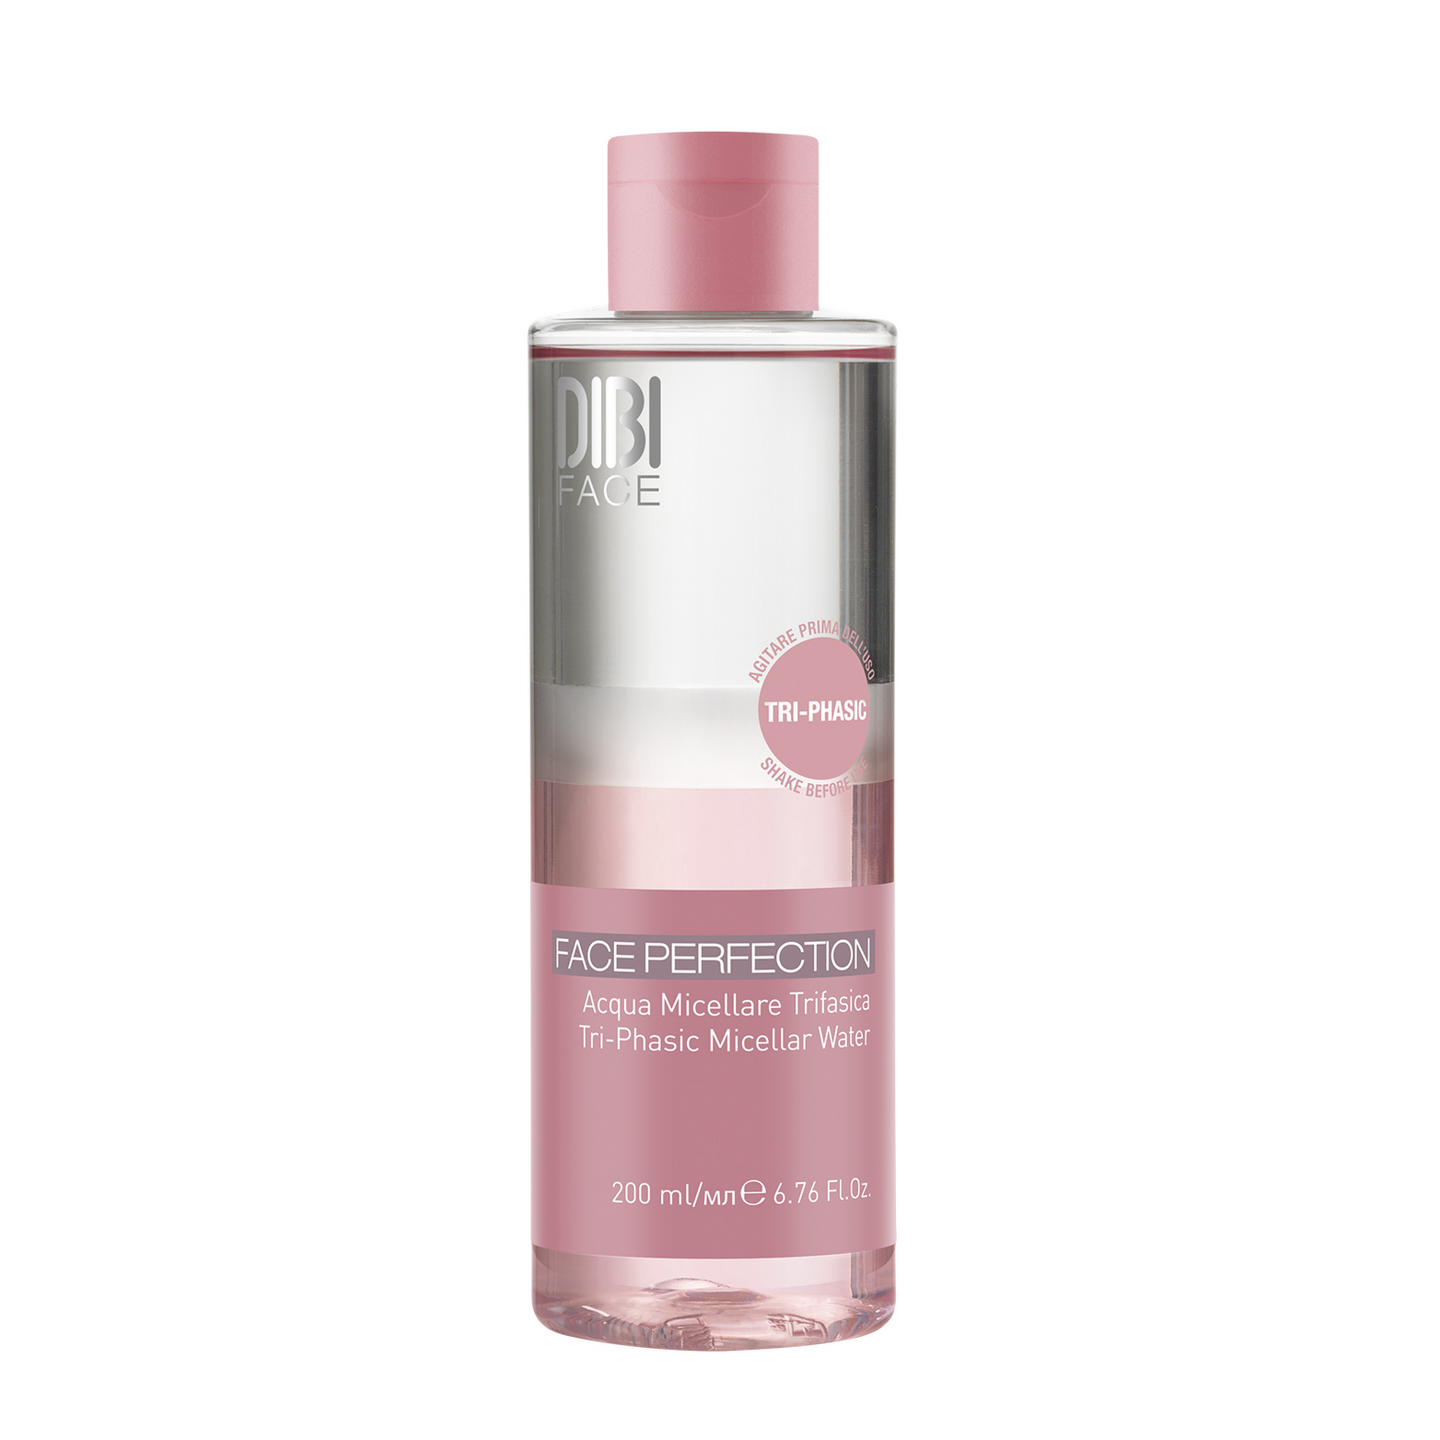 Face Perfection: Tri-phasic Micellar Water